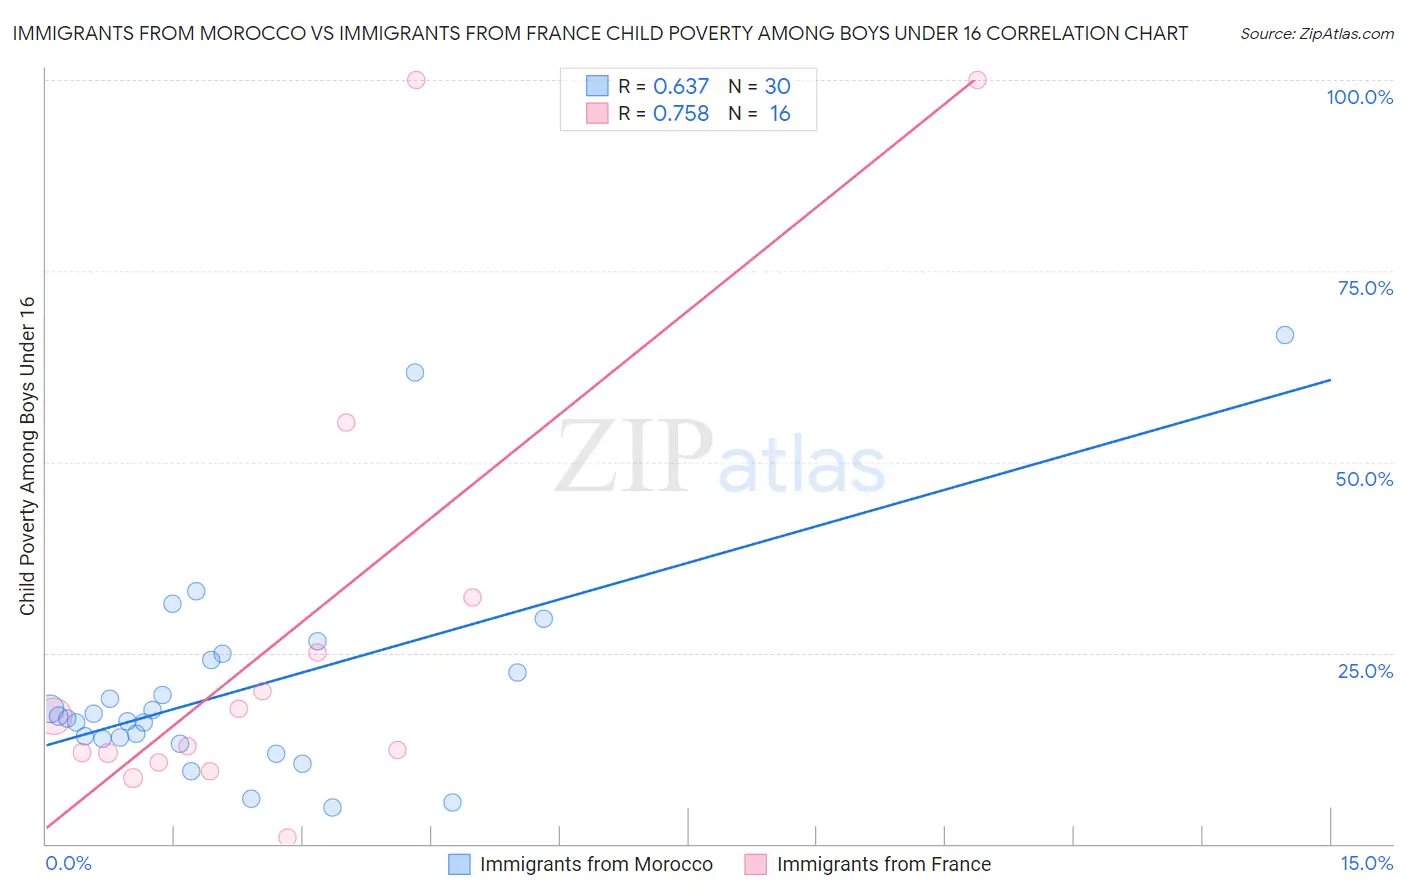 Immigrants from Morocco vs Immigrants from France Child Poverty Among Boys Under 16